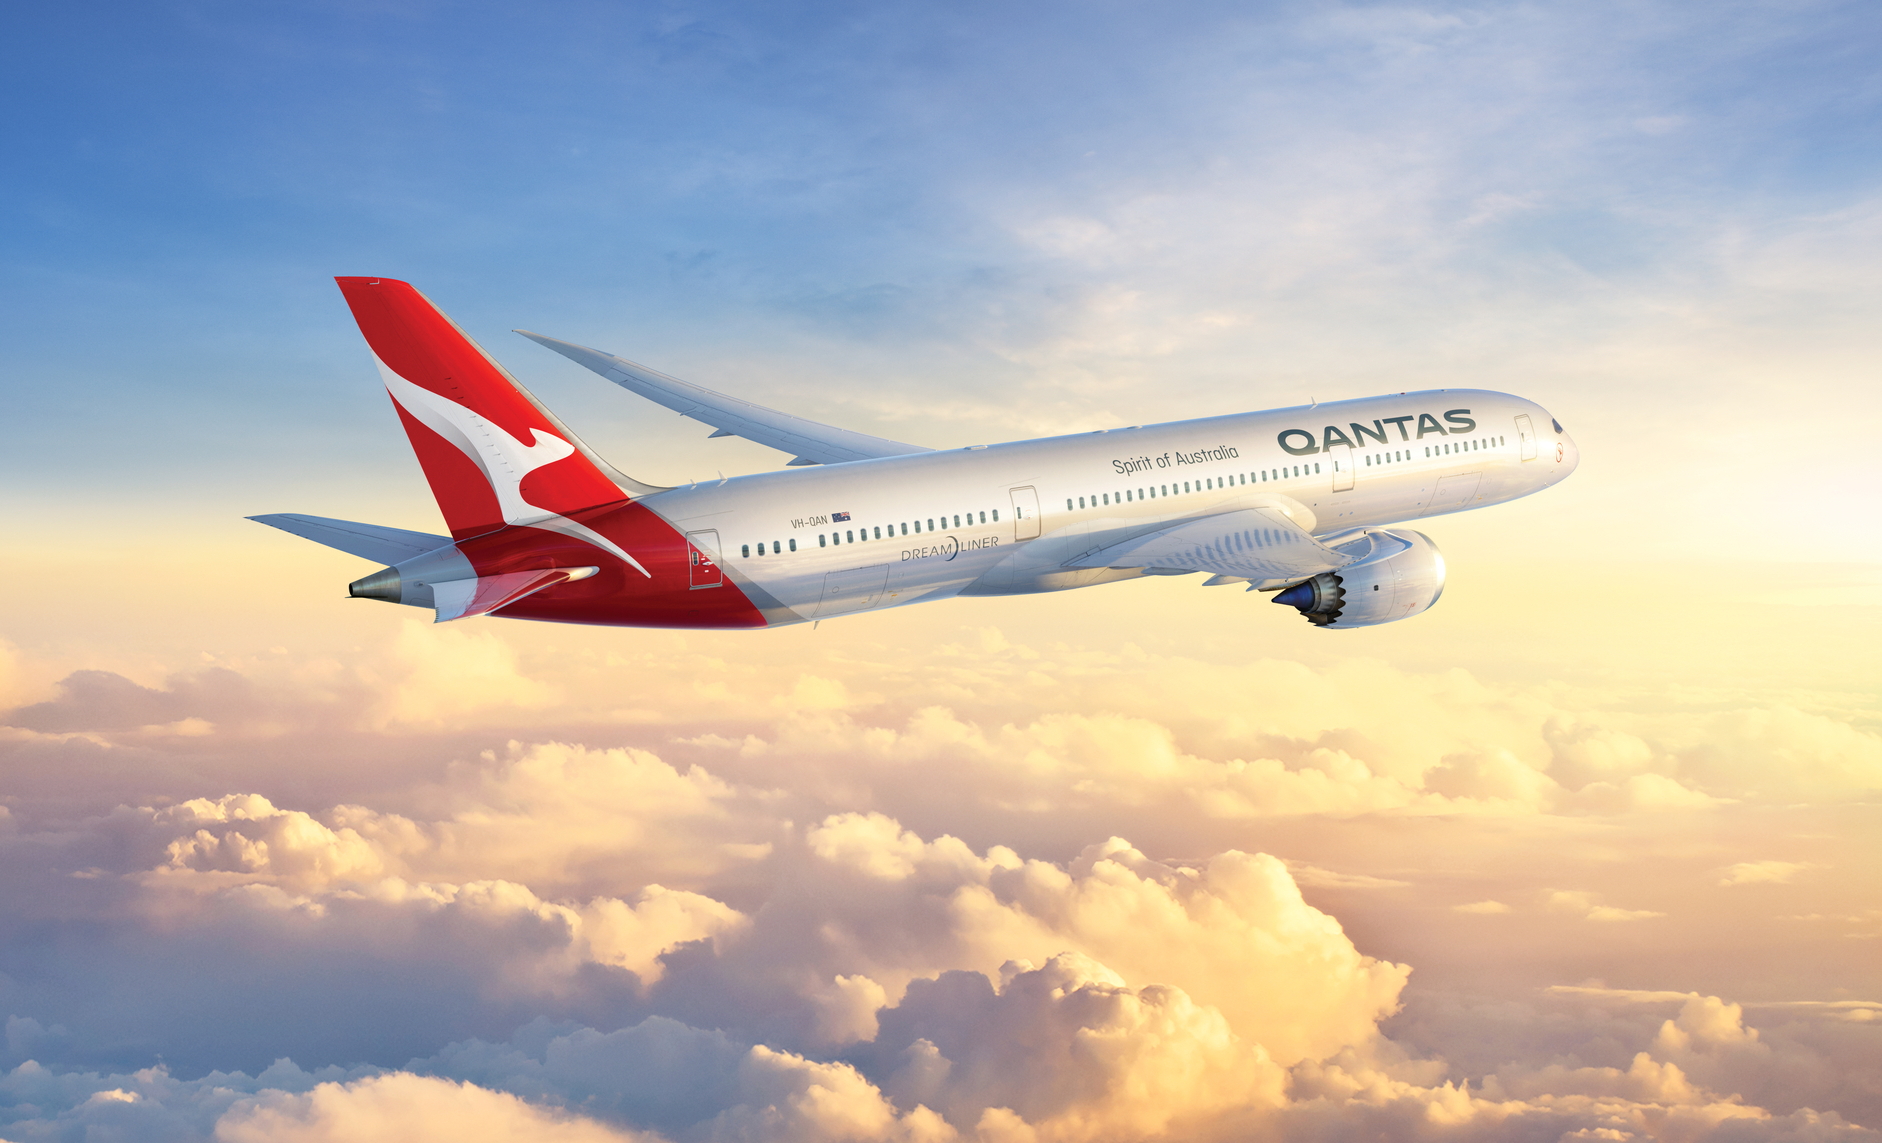 Qantas 787 flying with clouds in the background